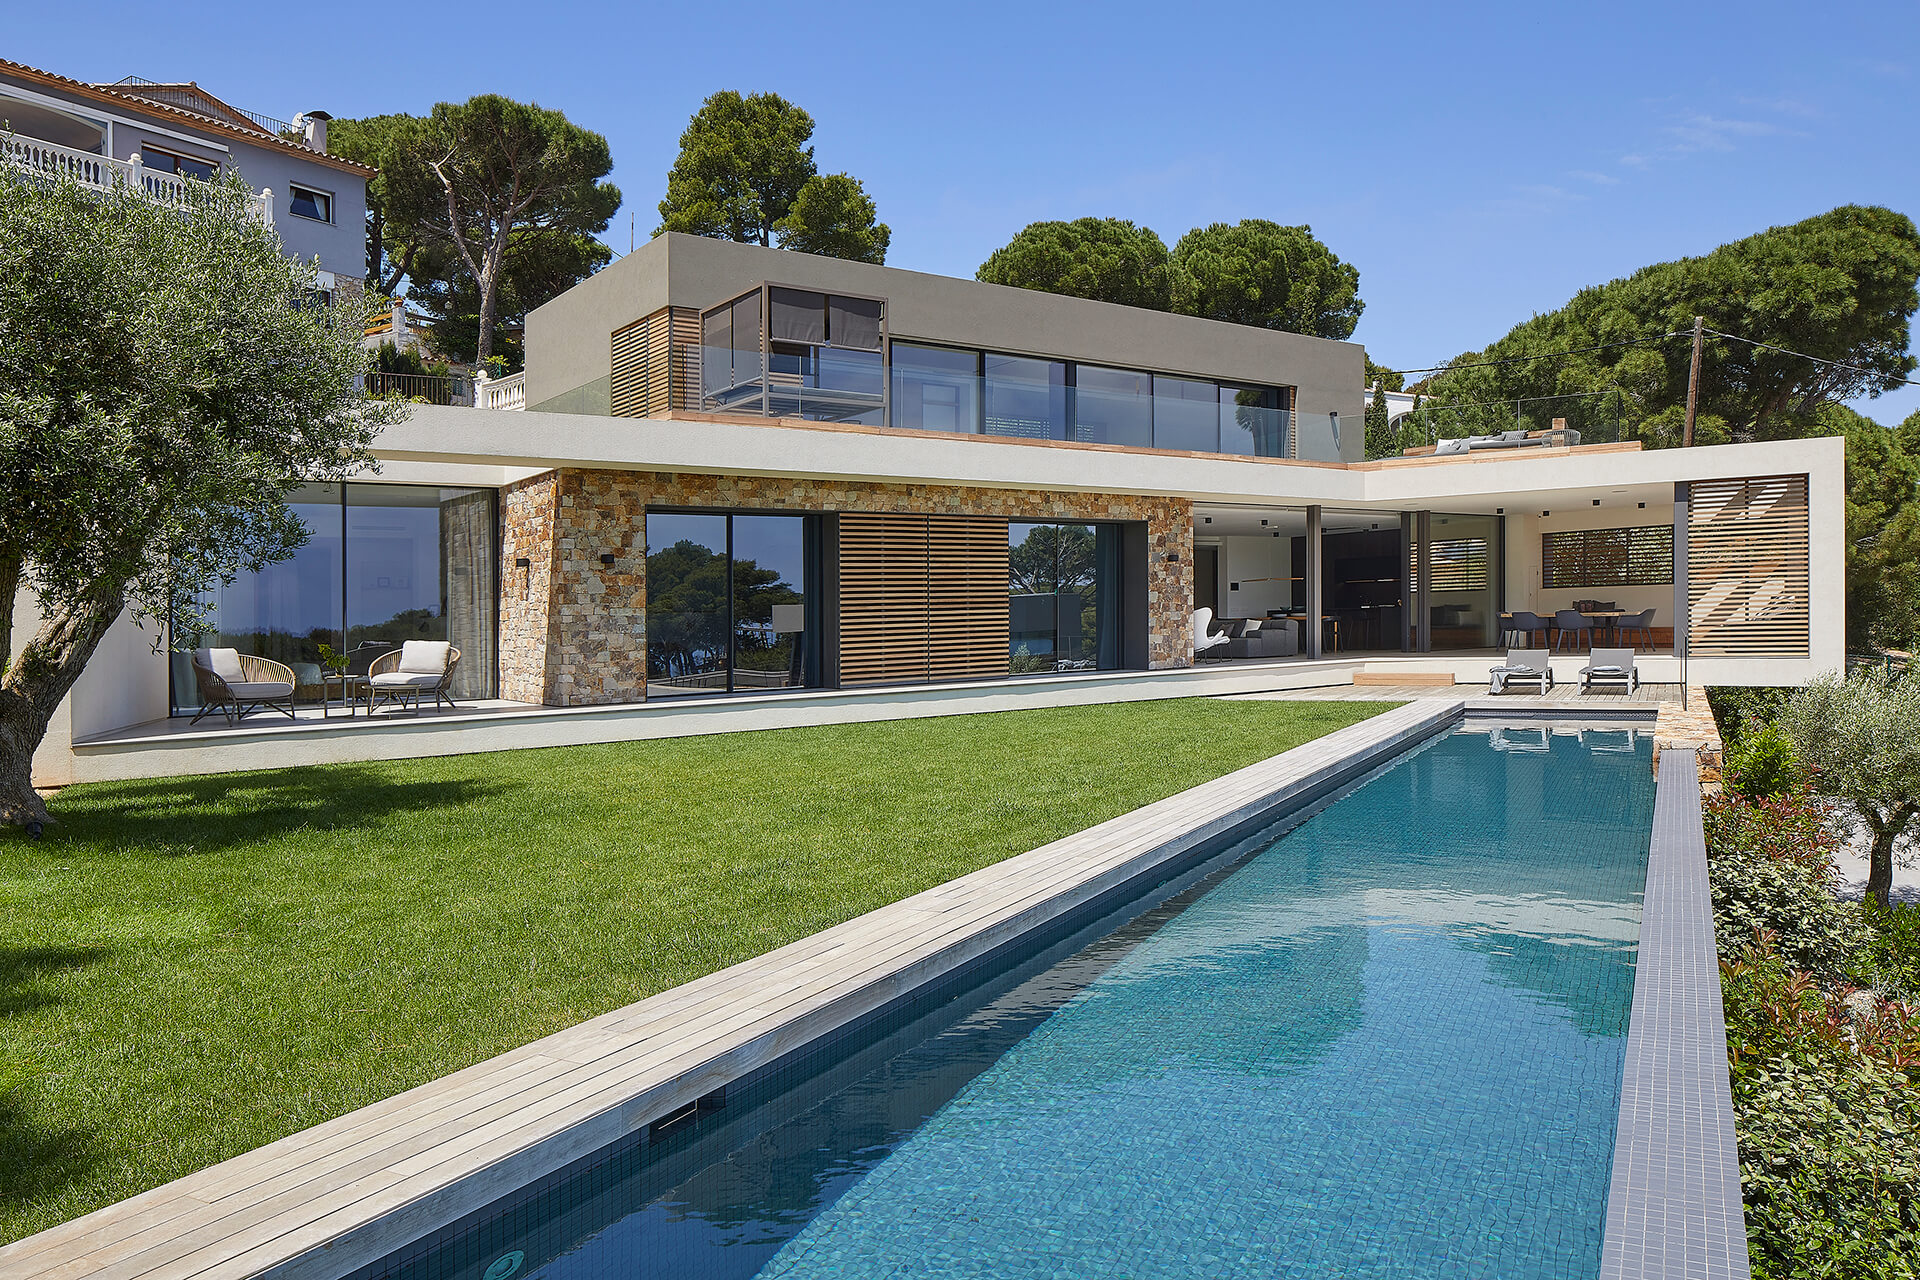 Home designed by Jané & Font with swimming pool